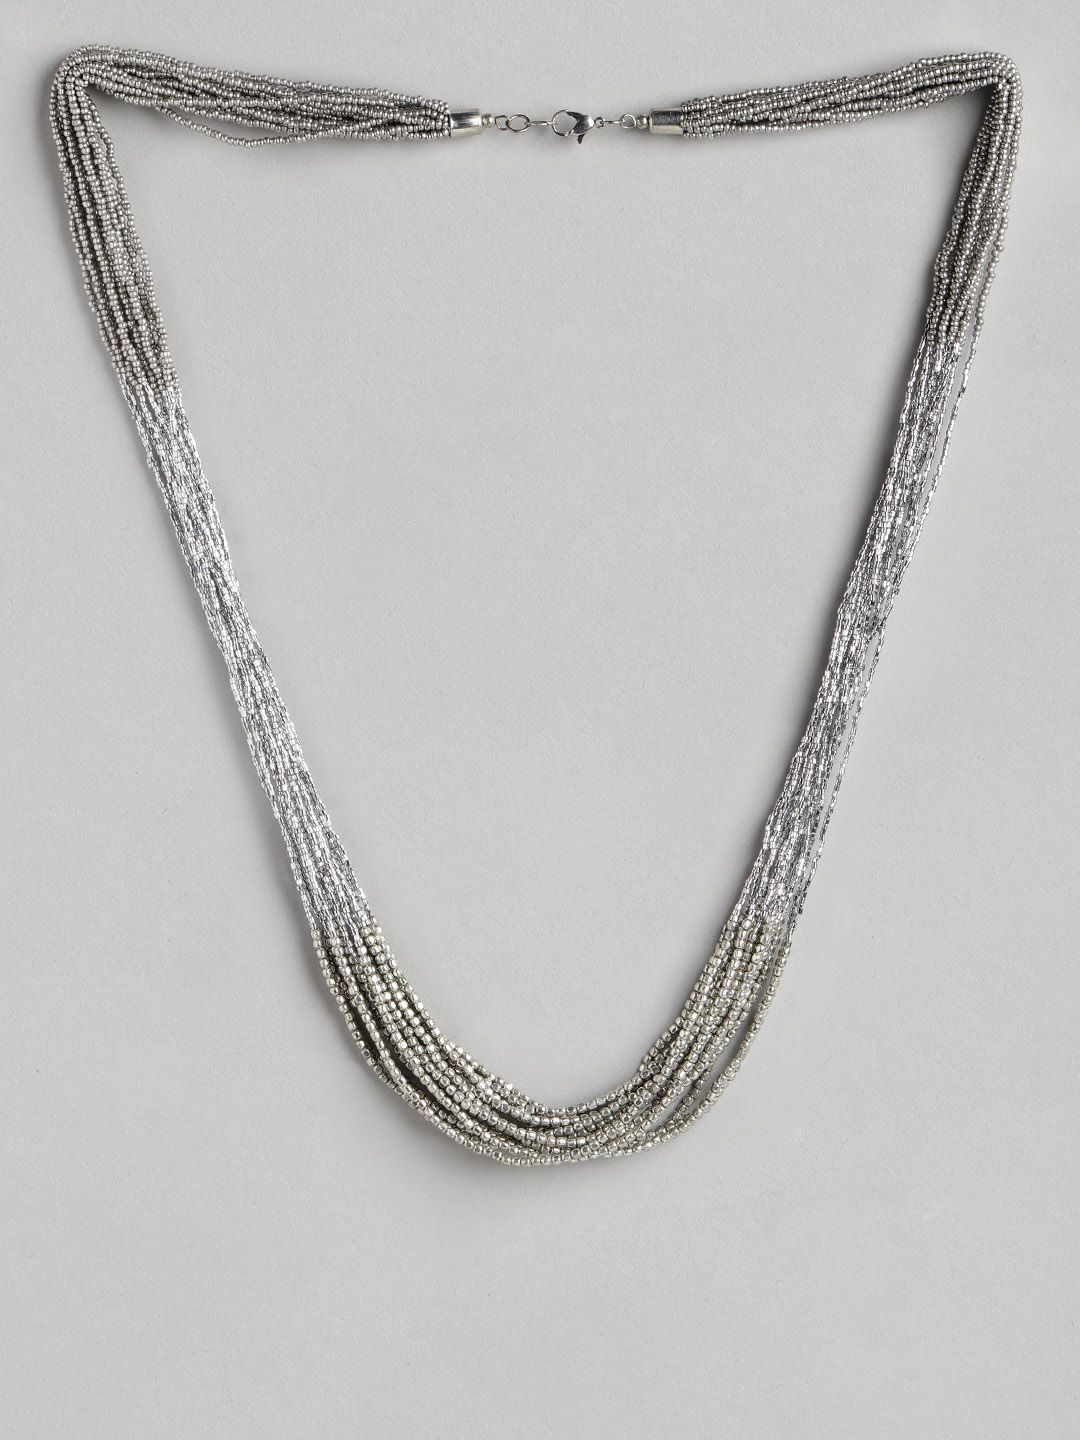 RICHEERA Silver-Toned Layered Necklace Price in India